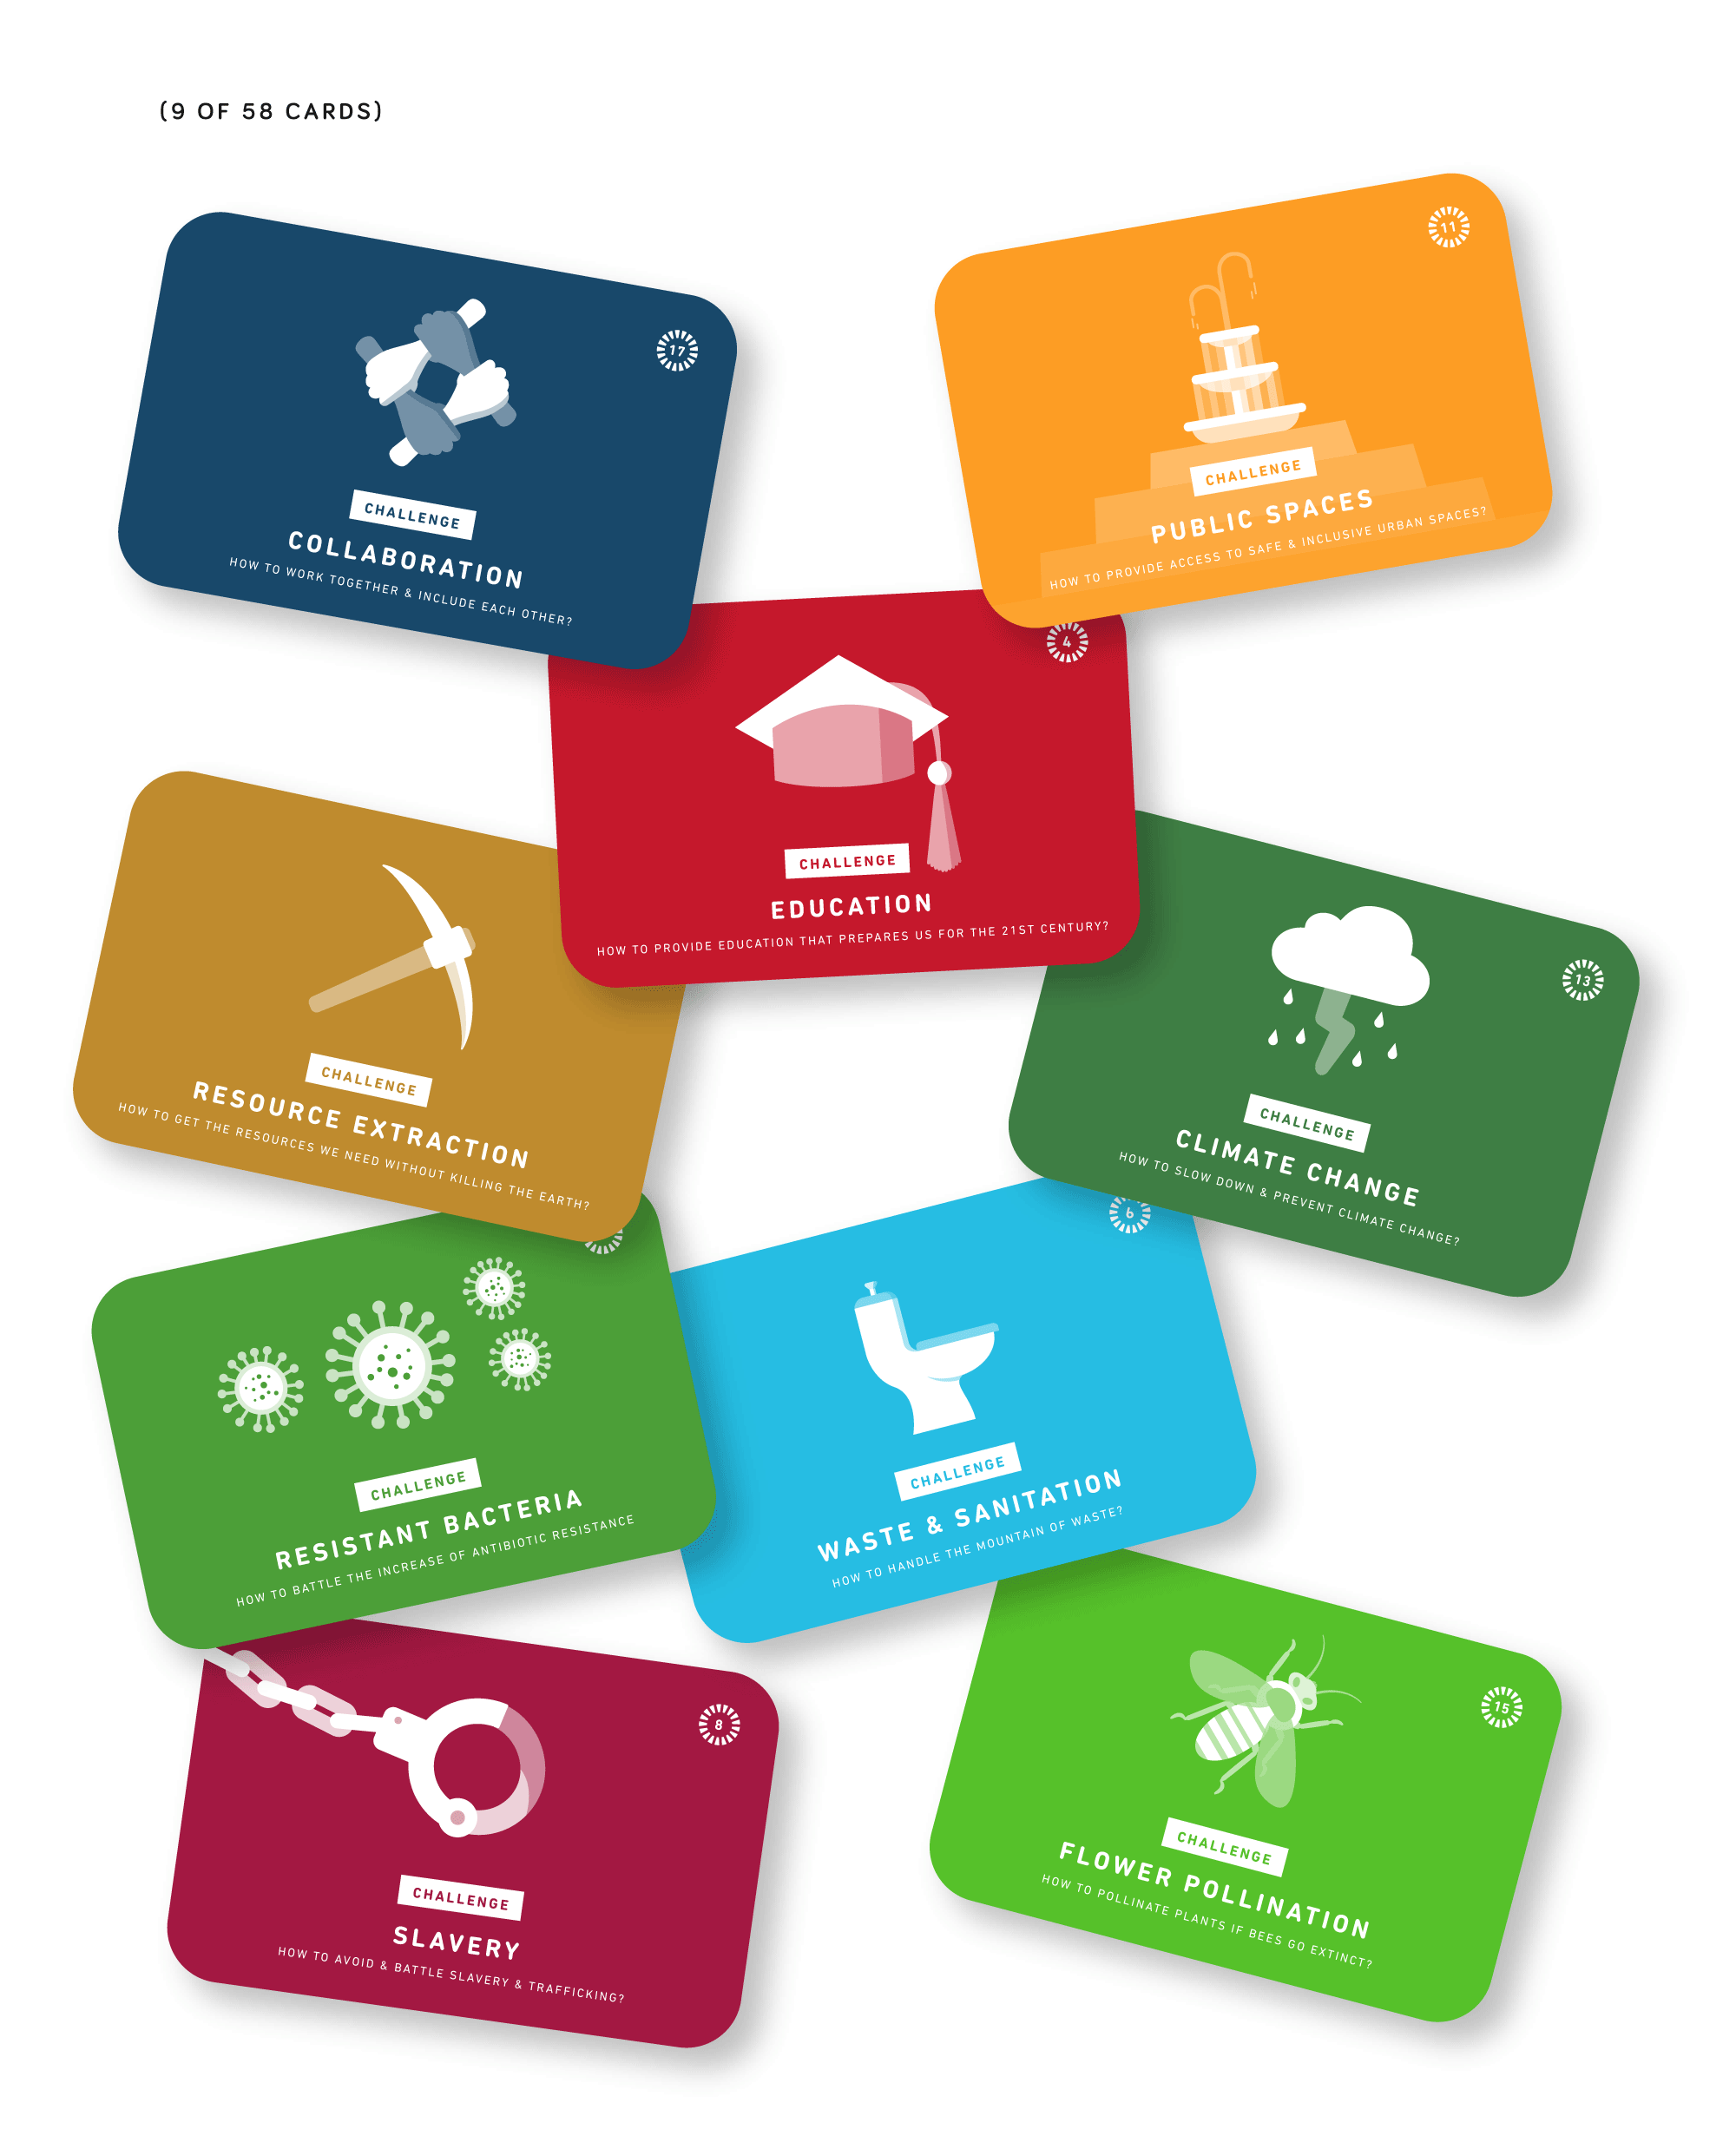 At a UN summit in 2015, 193 world leaders agreed to 17 Global Goals for Sustainable Development. The Global Goals Cards are 58 colour-coded cards that illuminate and allow us to discuss the UN goals for transforming our world.